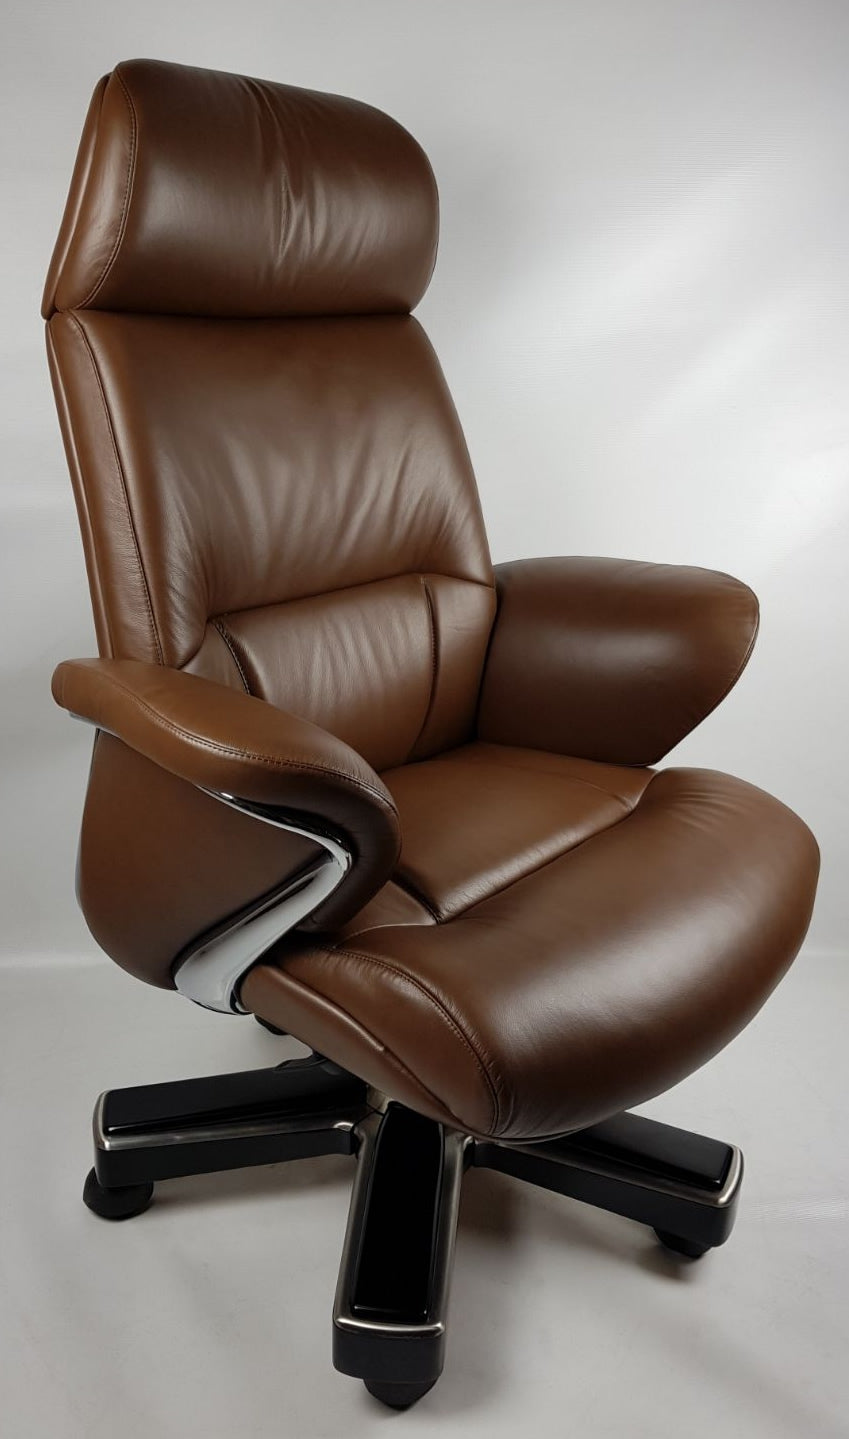 Large Luxury Executive Office Chair with Genuine Brown Leather - YS1605A